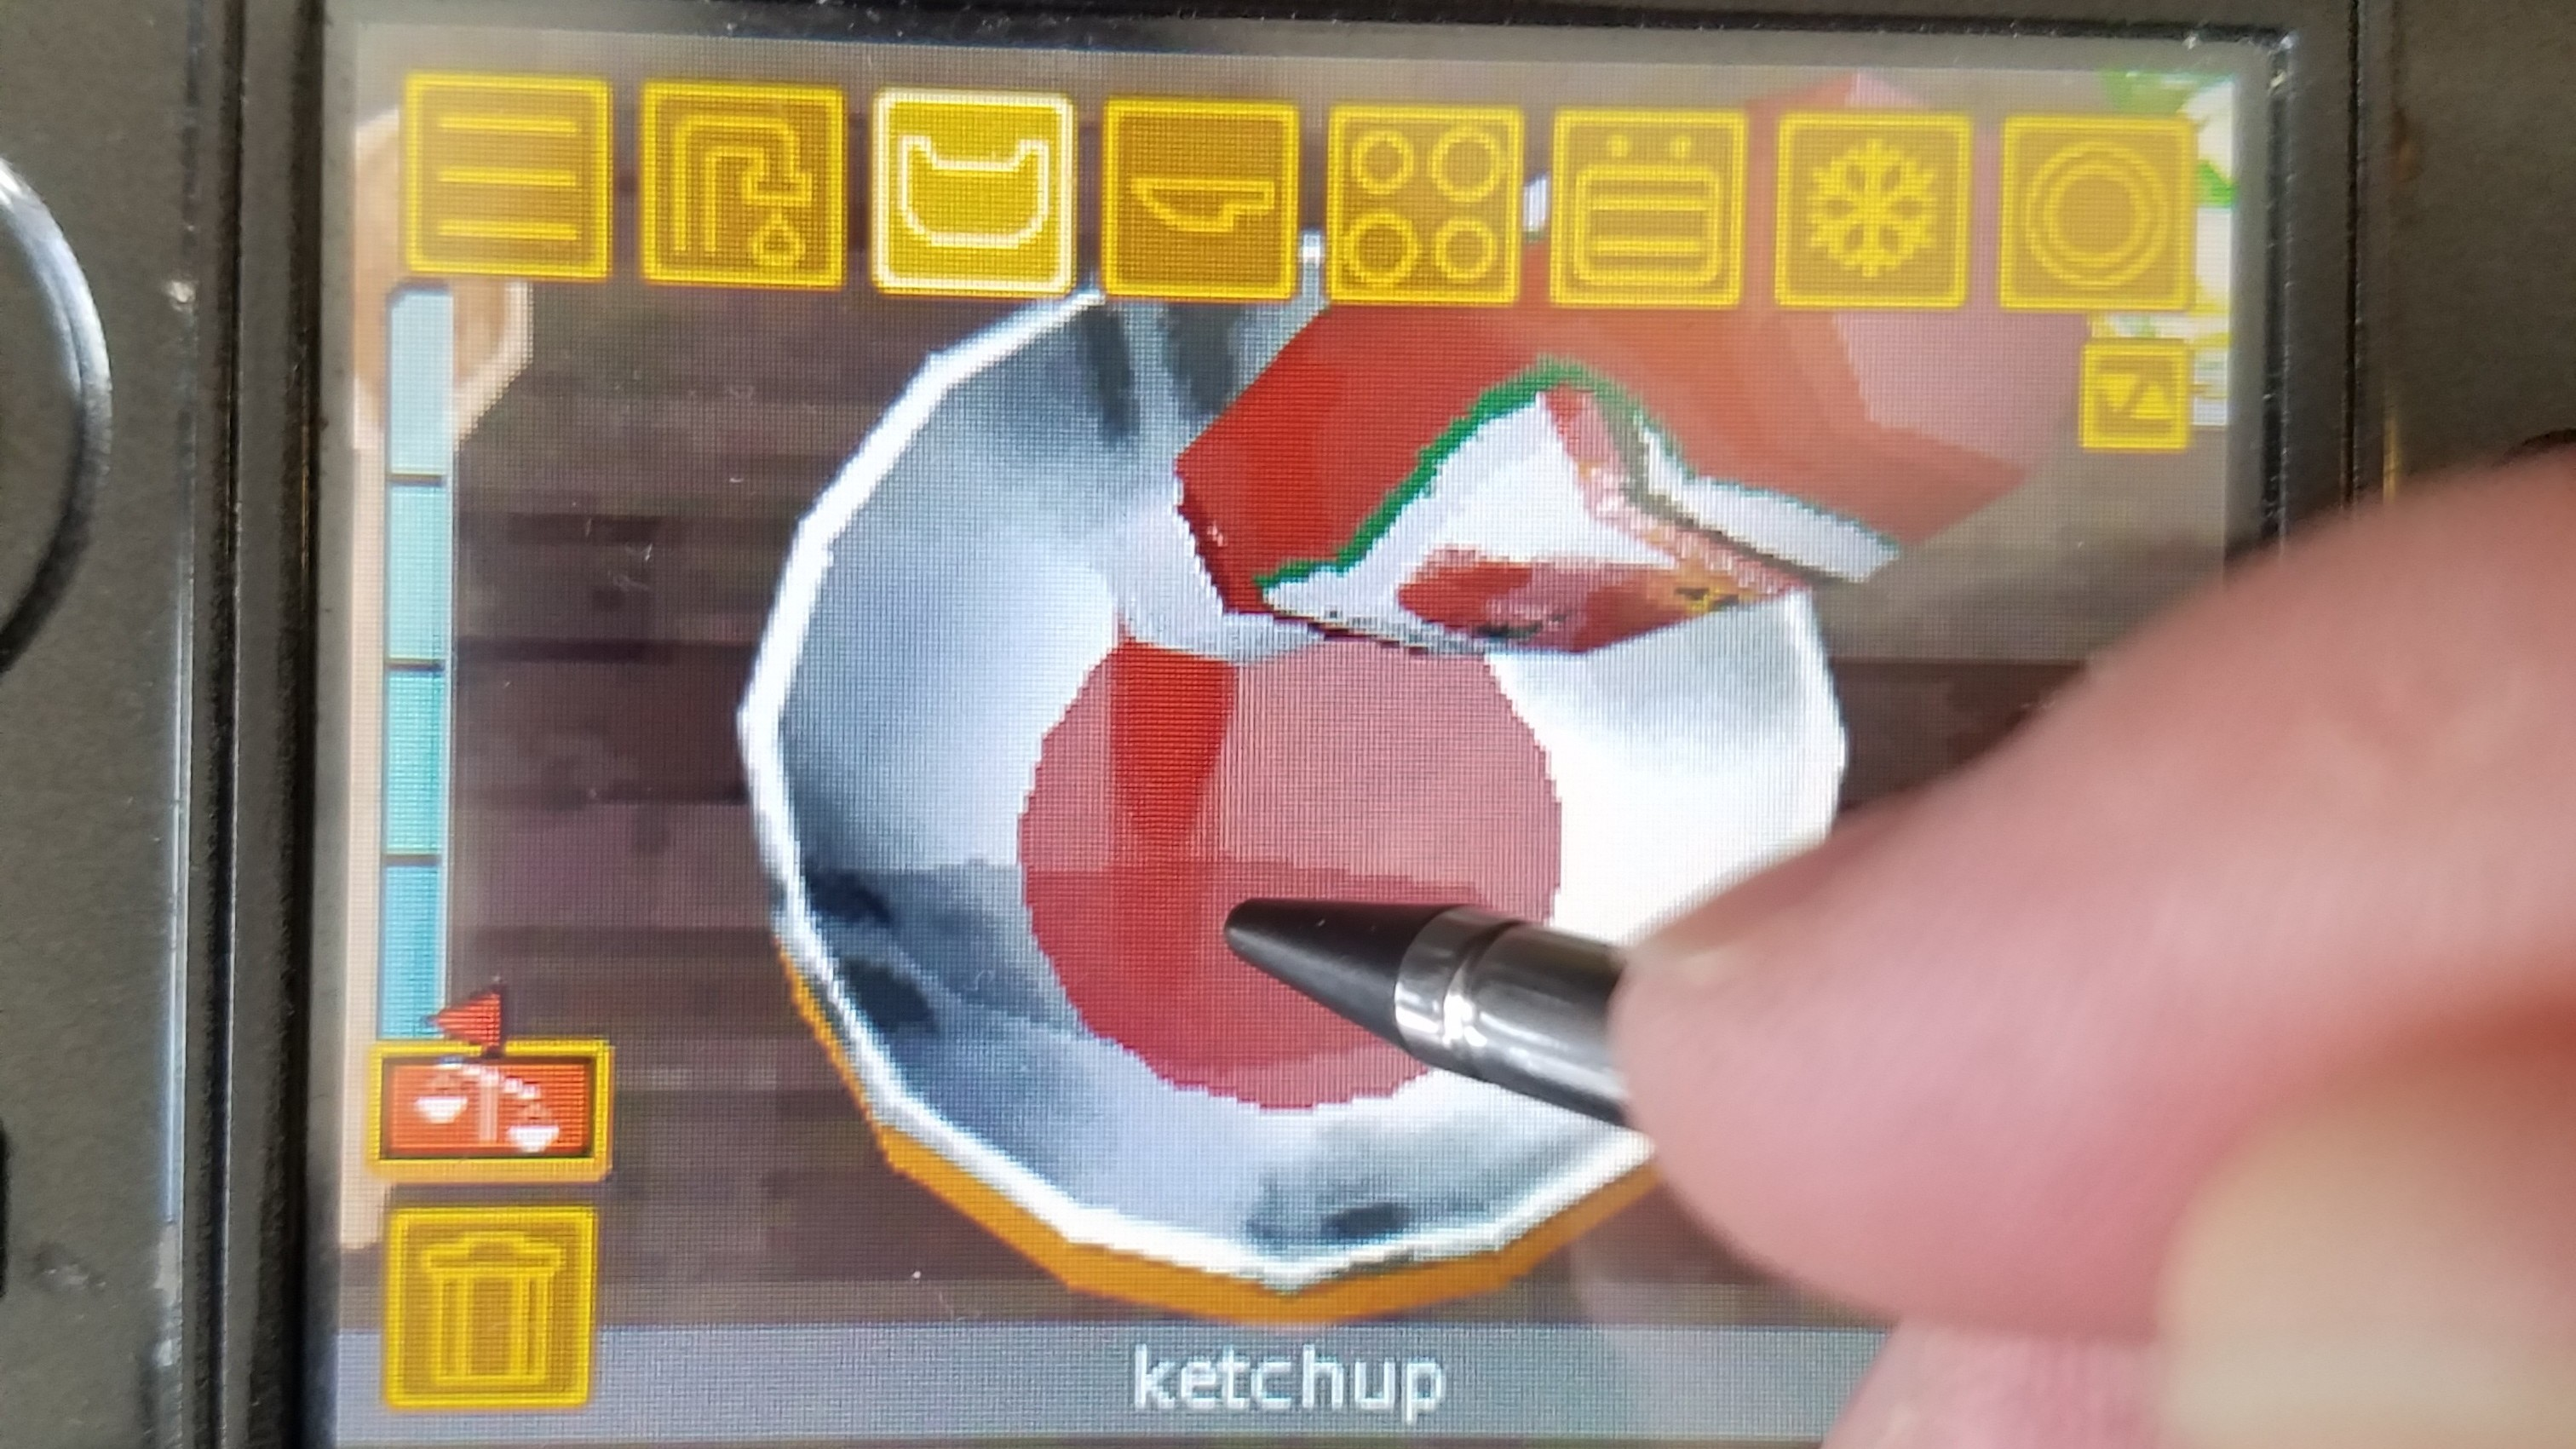 using stylus to pour ketchup into bowl